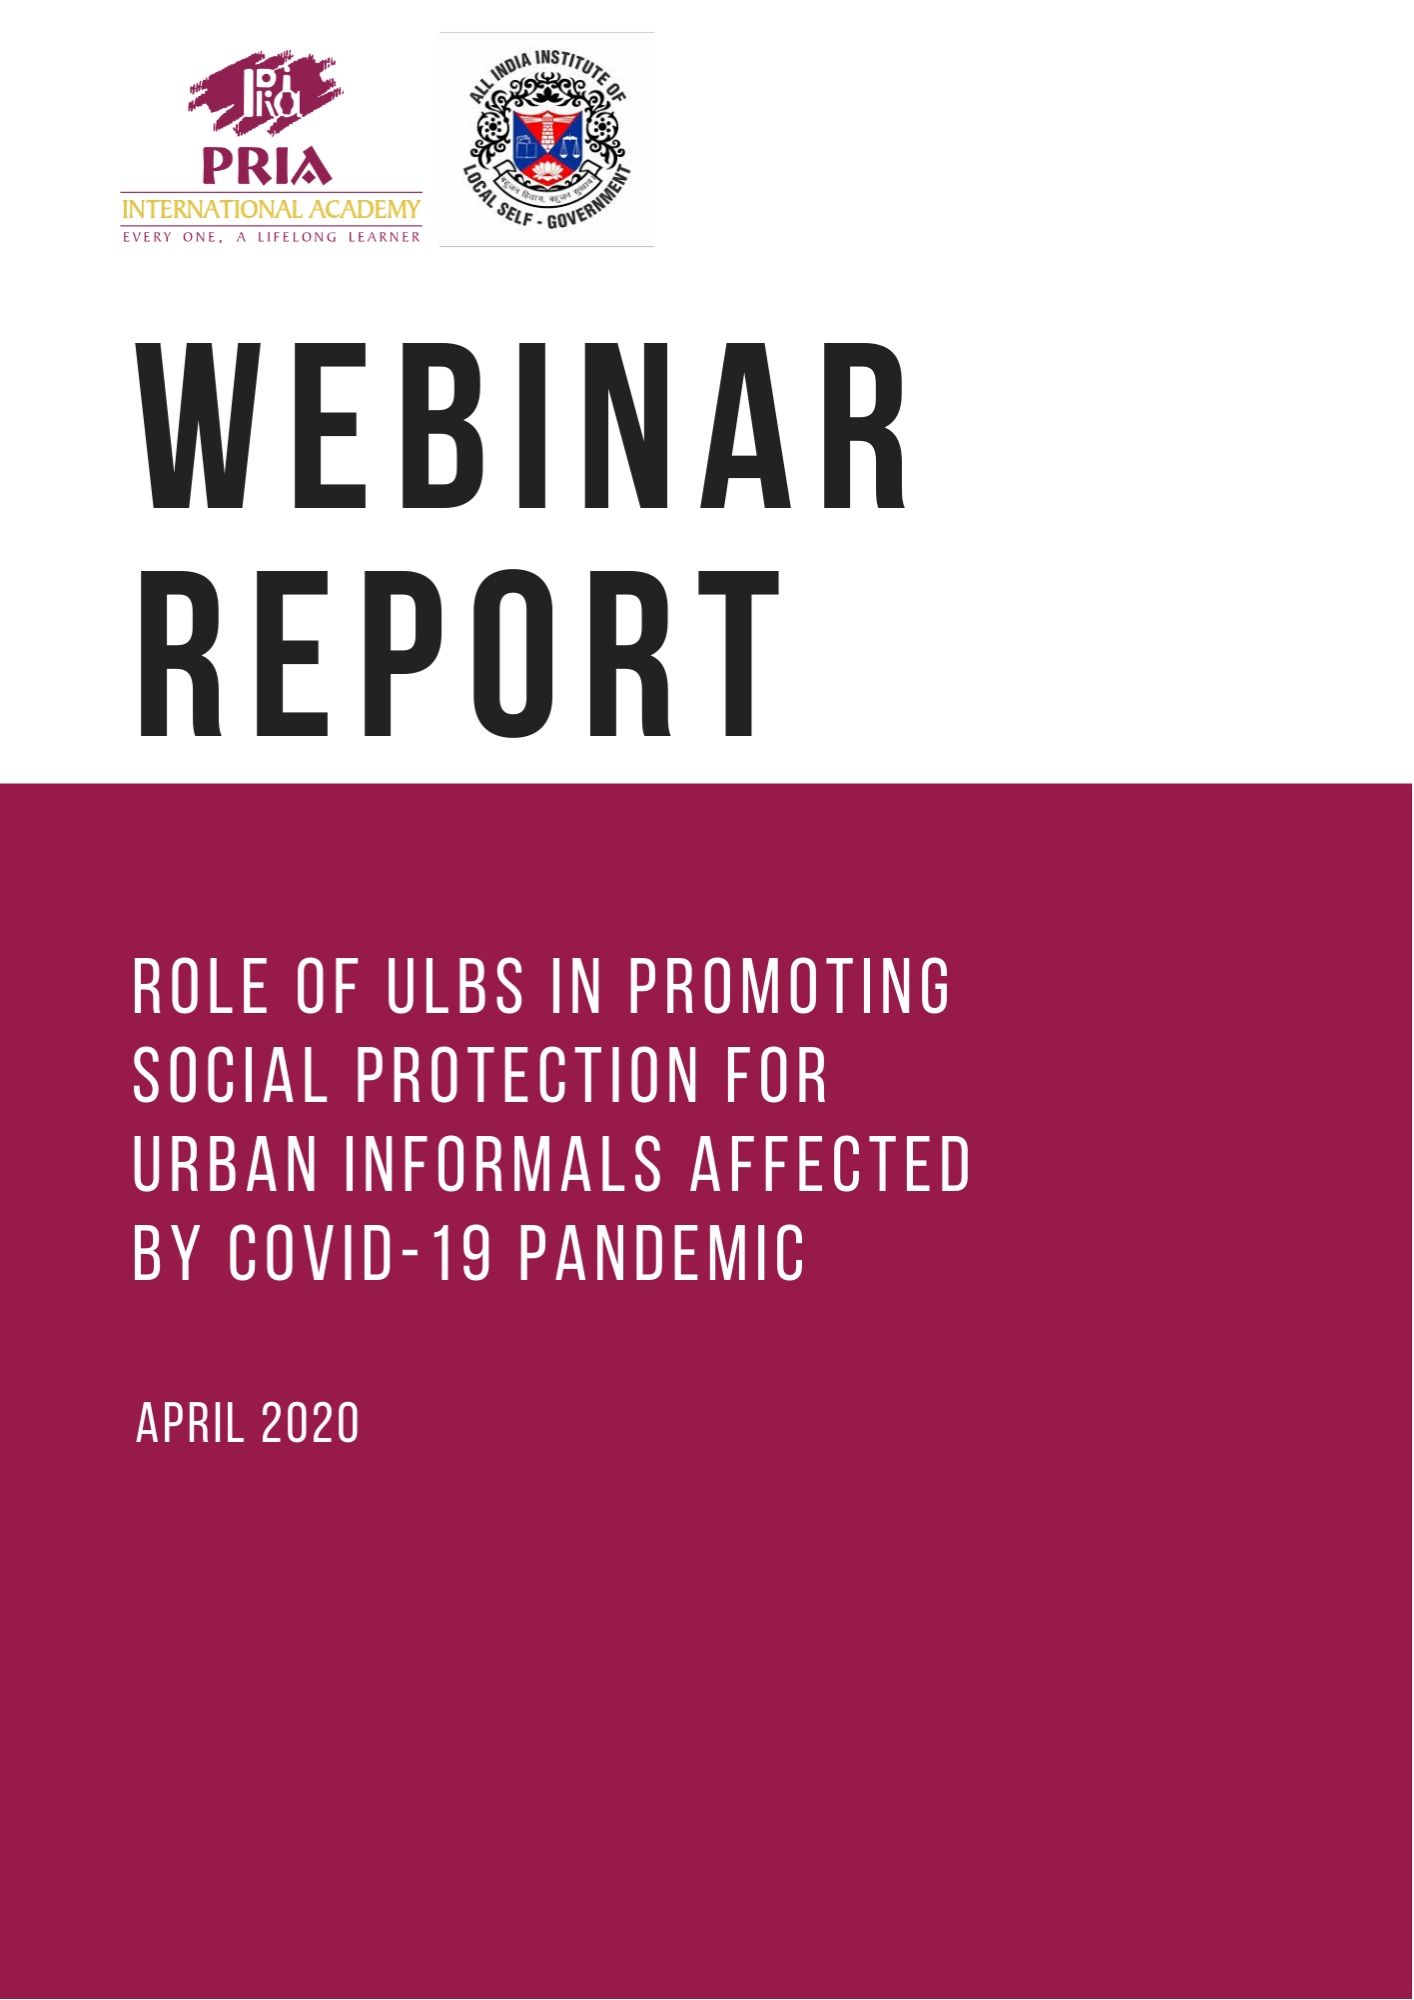 Webinar Report: Role of ULBs in Promoting Social Protection for Urban Informals Affected by COVID-19 Pandemic